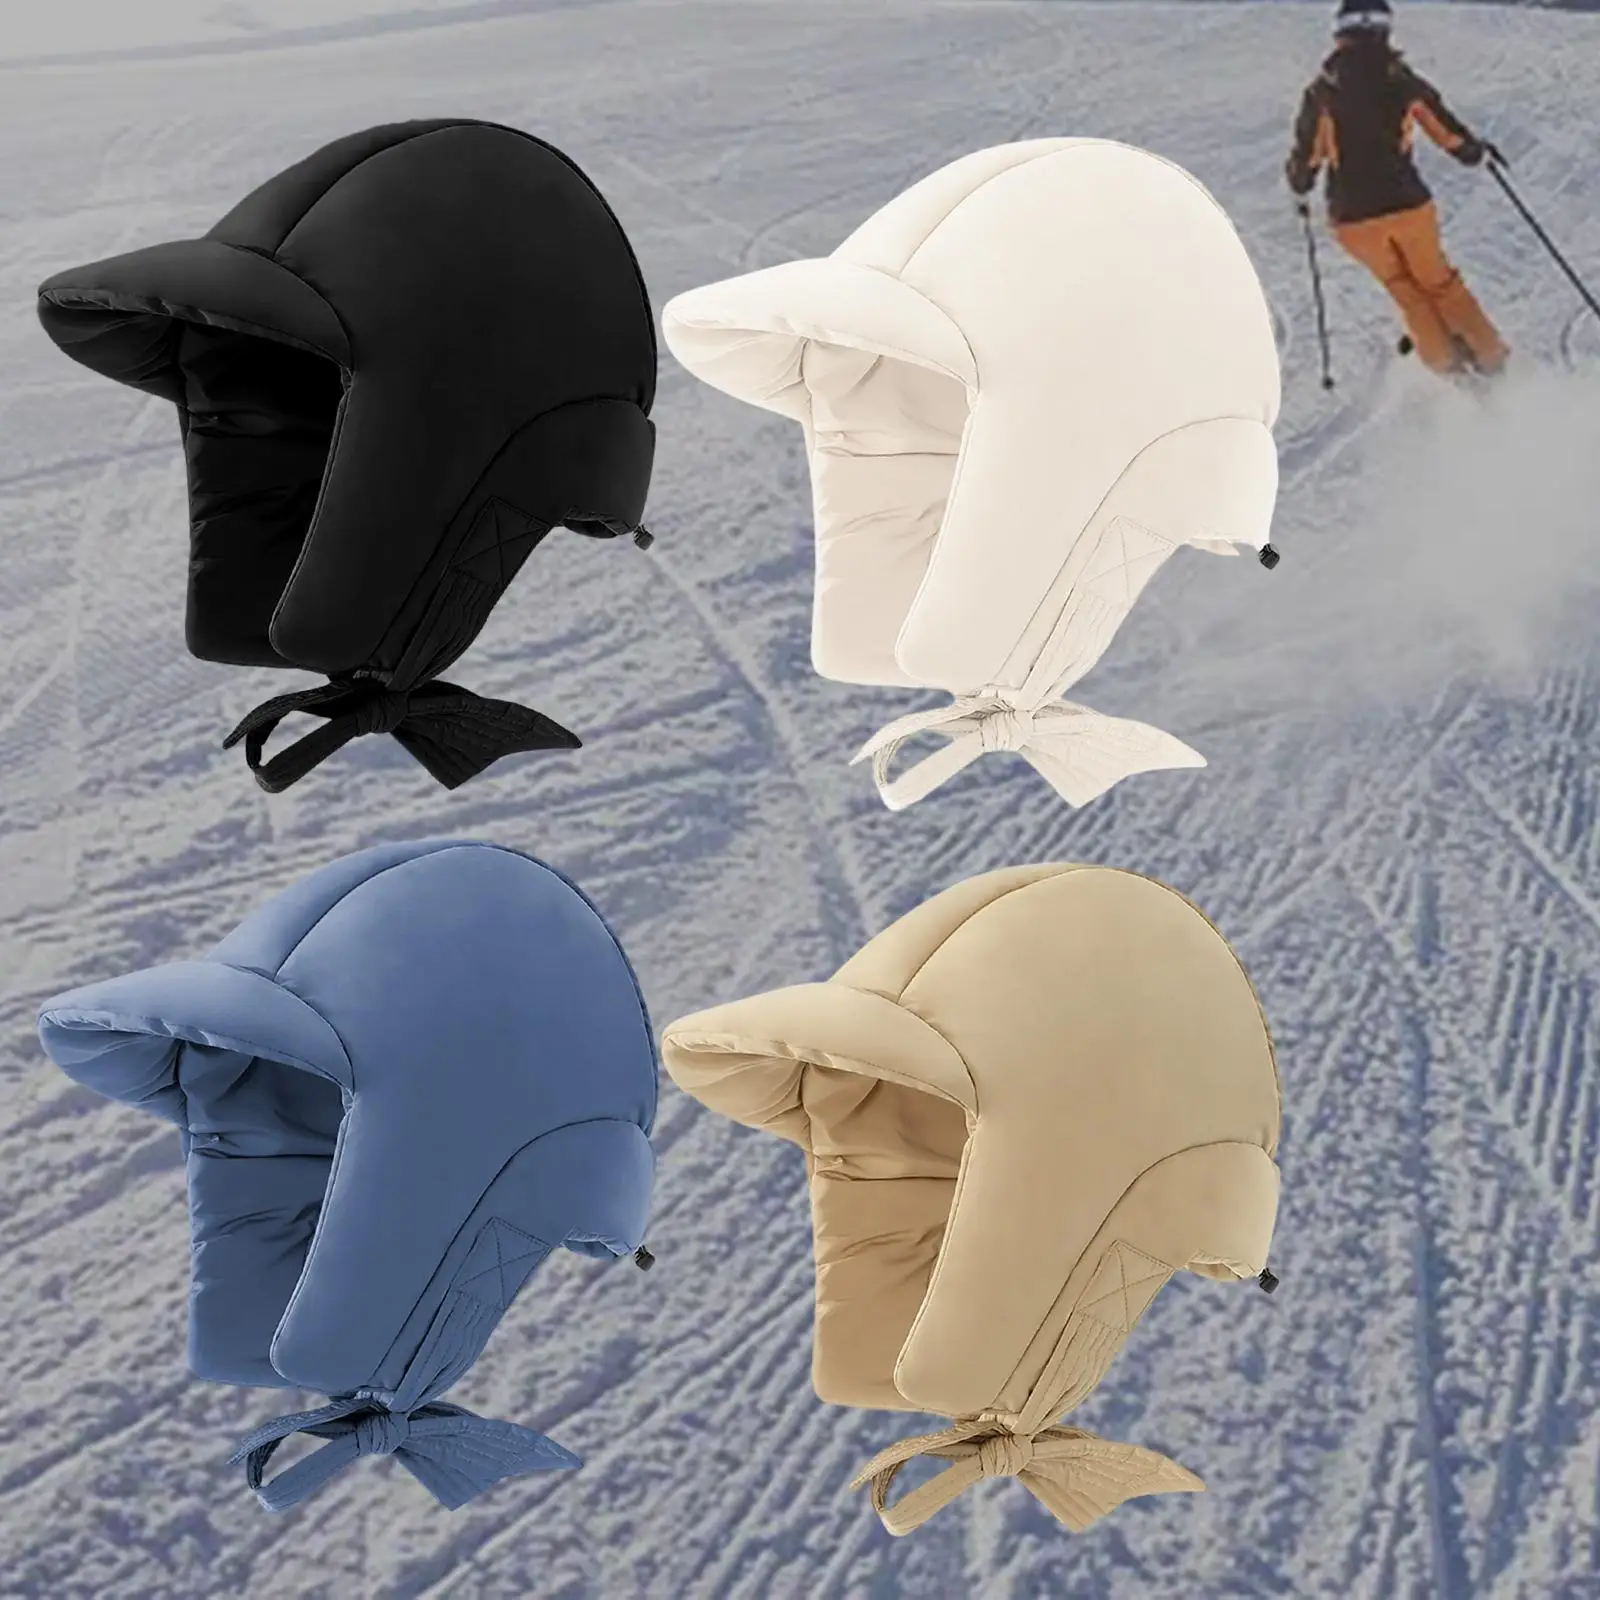 Down Hat with Earflaps Comfortable Baseball Cap for Women Warm Hat with Visor for Skiing Biking Cold Weather Camping Skating